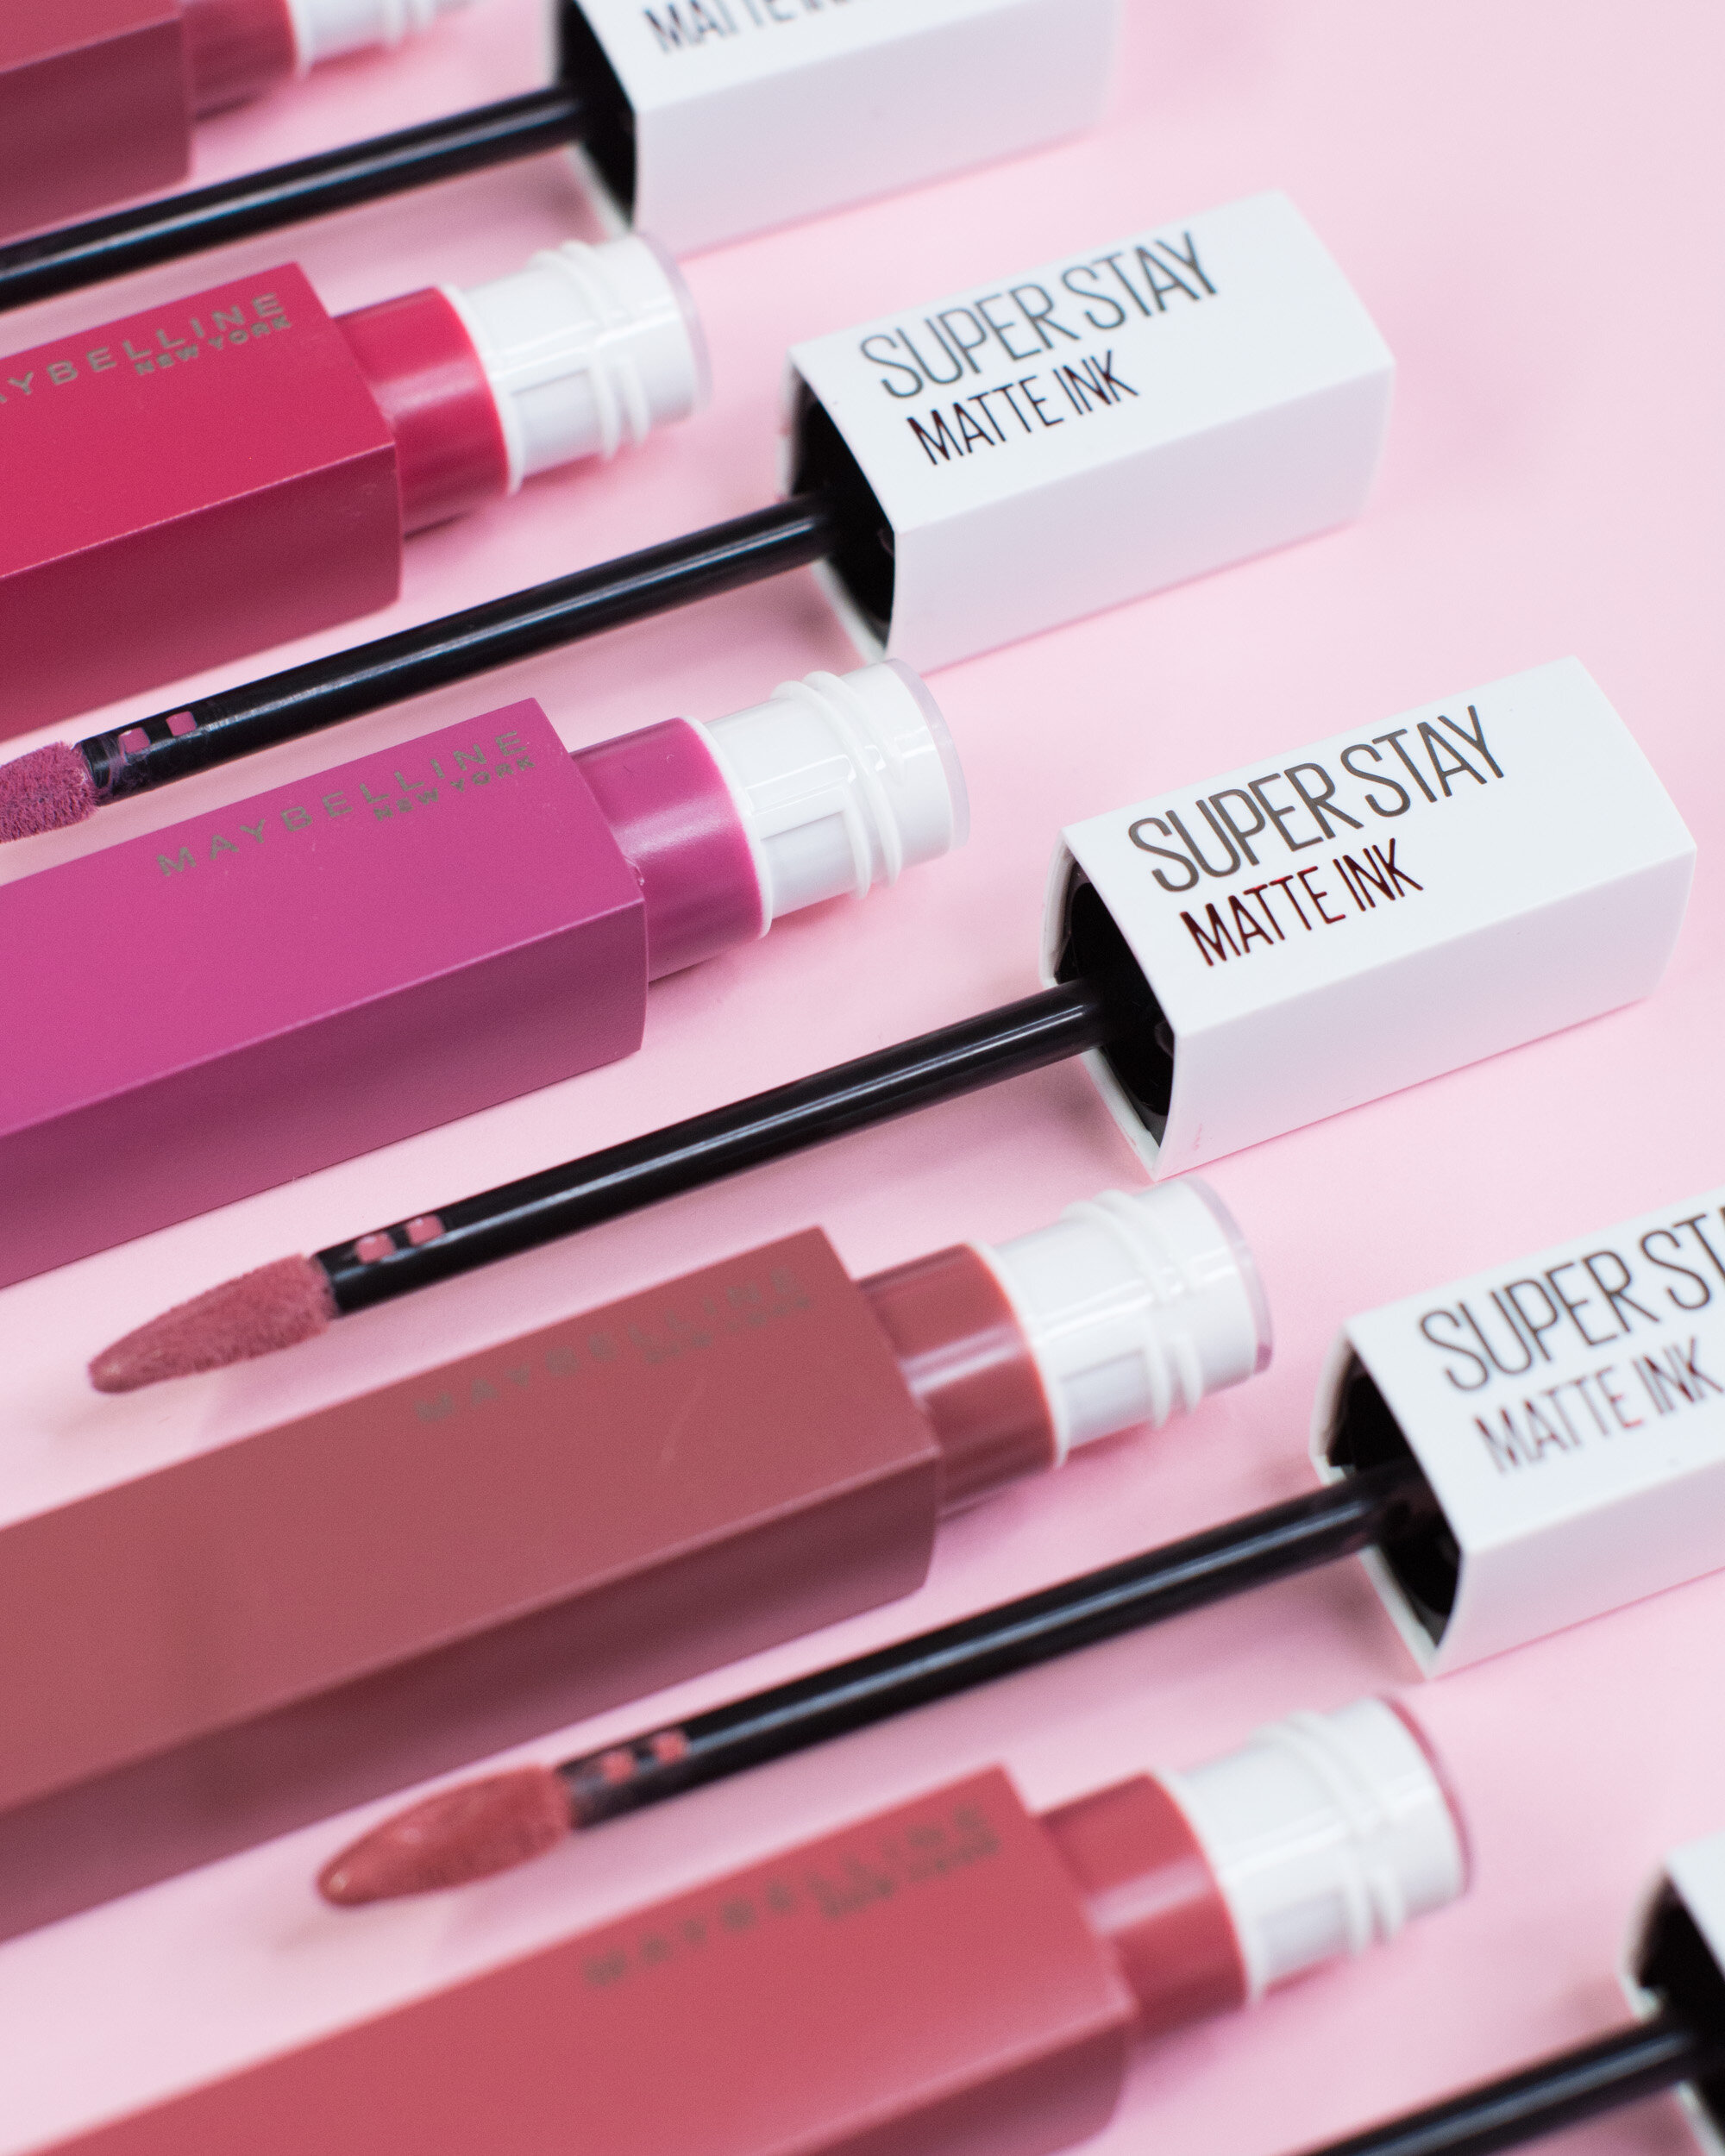 Maybelline Superstay Matte Ink liquid long- lasting lipstick swatches on  lips 👄